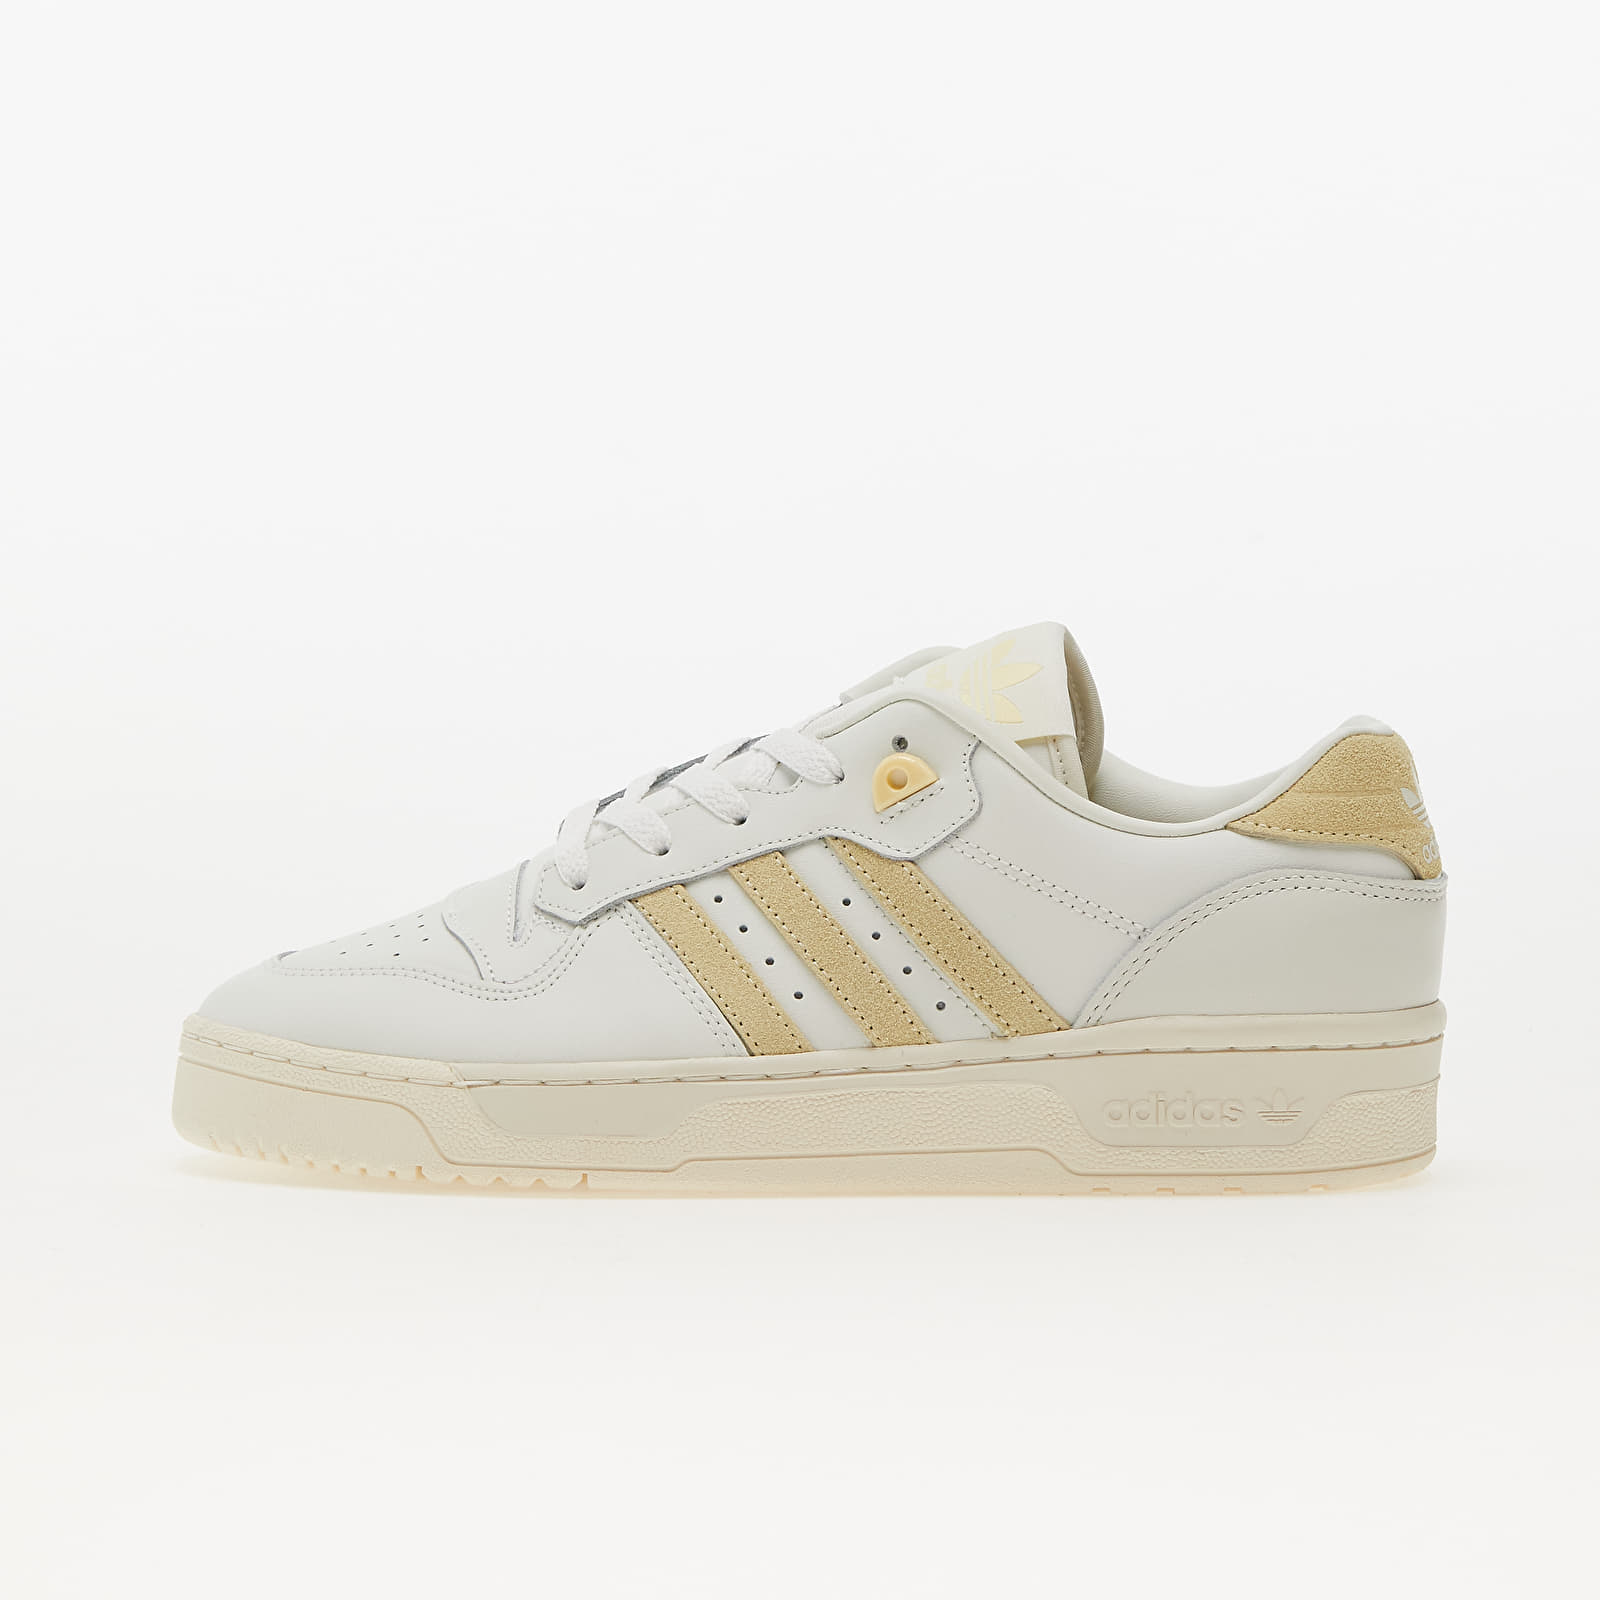 Pánske tenisky a topánky adidas Originals Rivalry Low White Tint/ Easy Yellow/ Off White